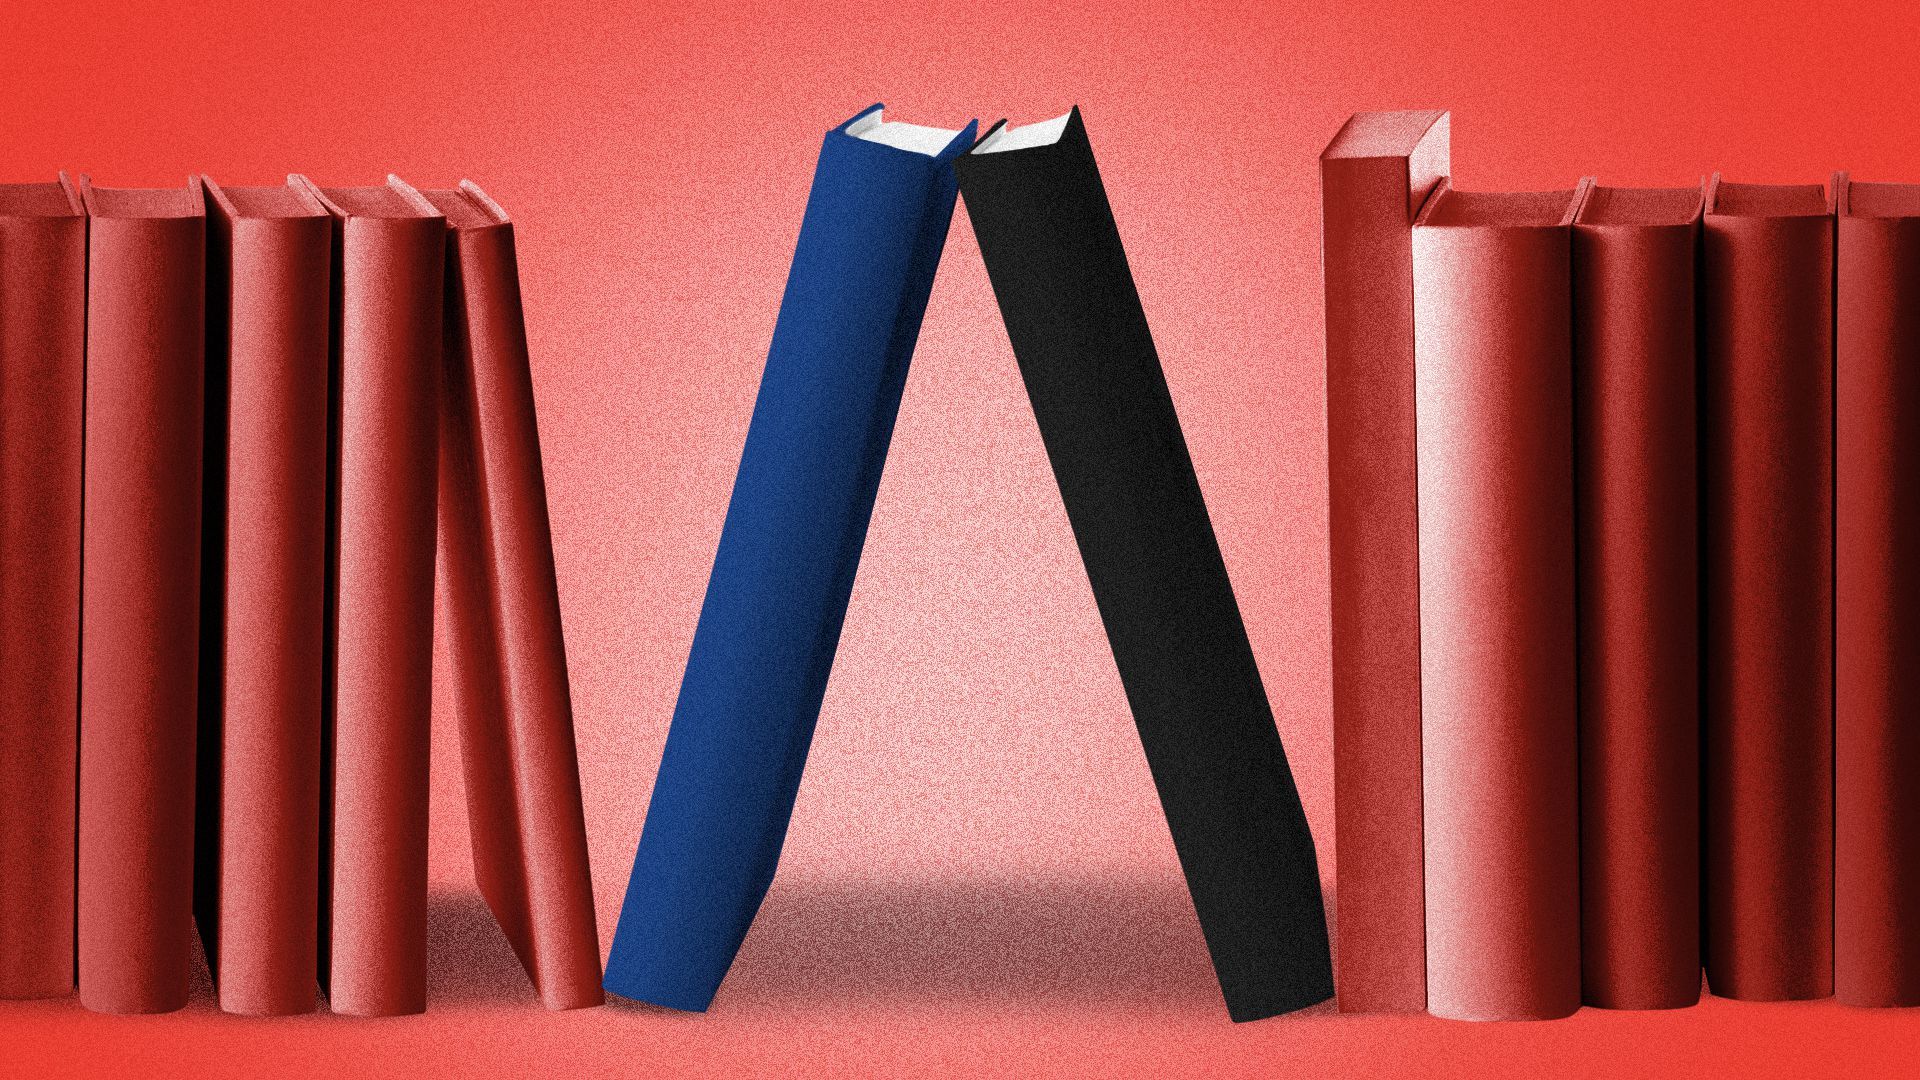 Illustration of two books forming the Axios logo in between other books.